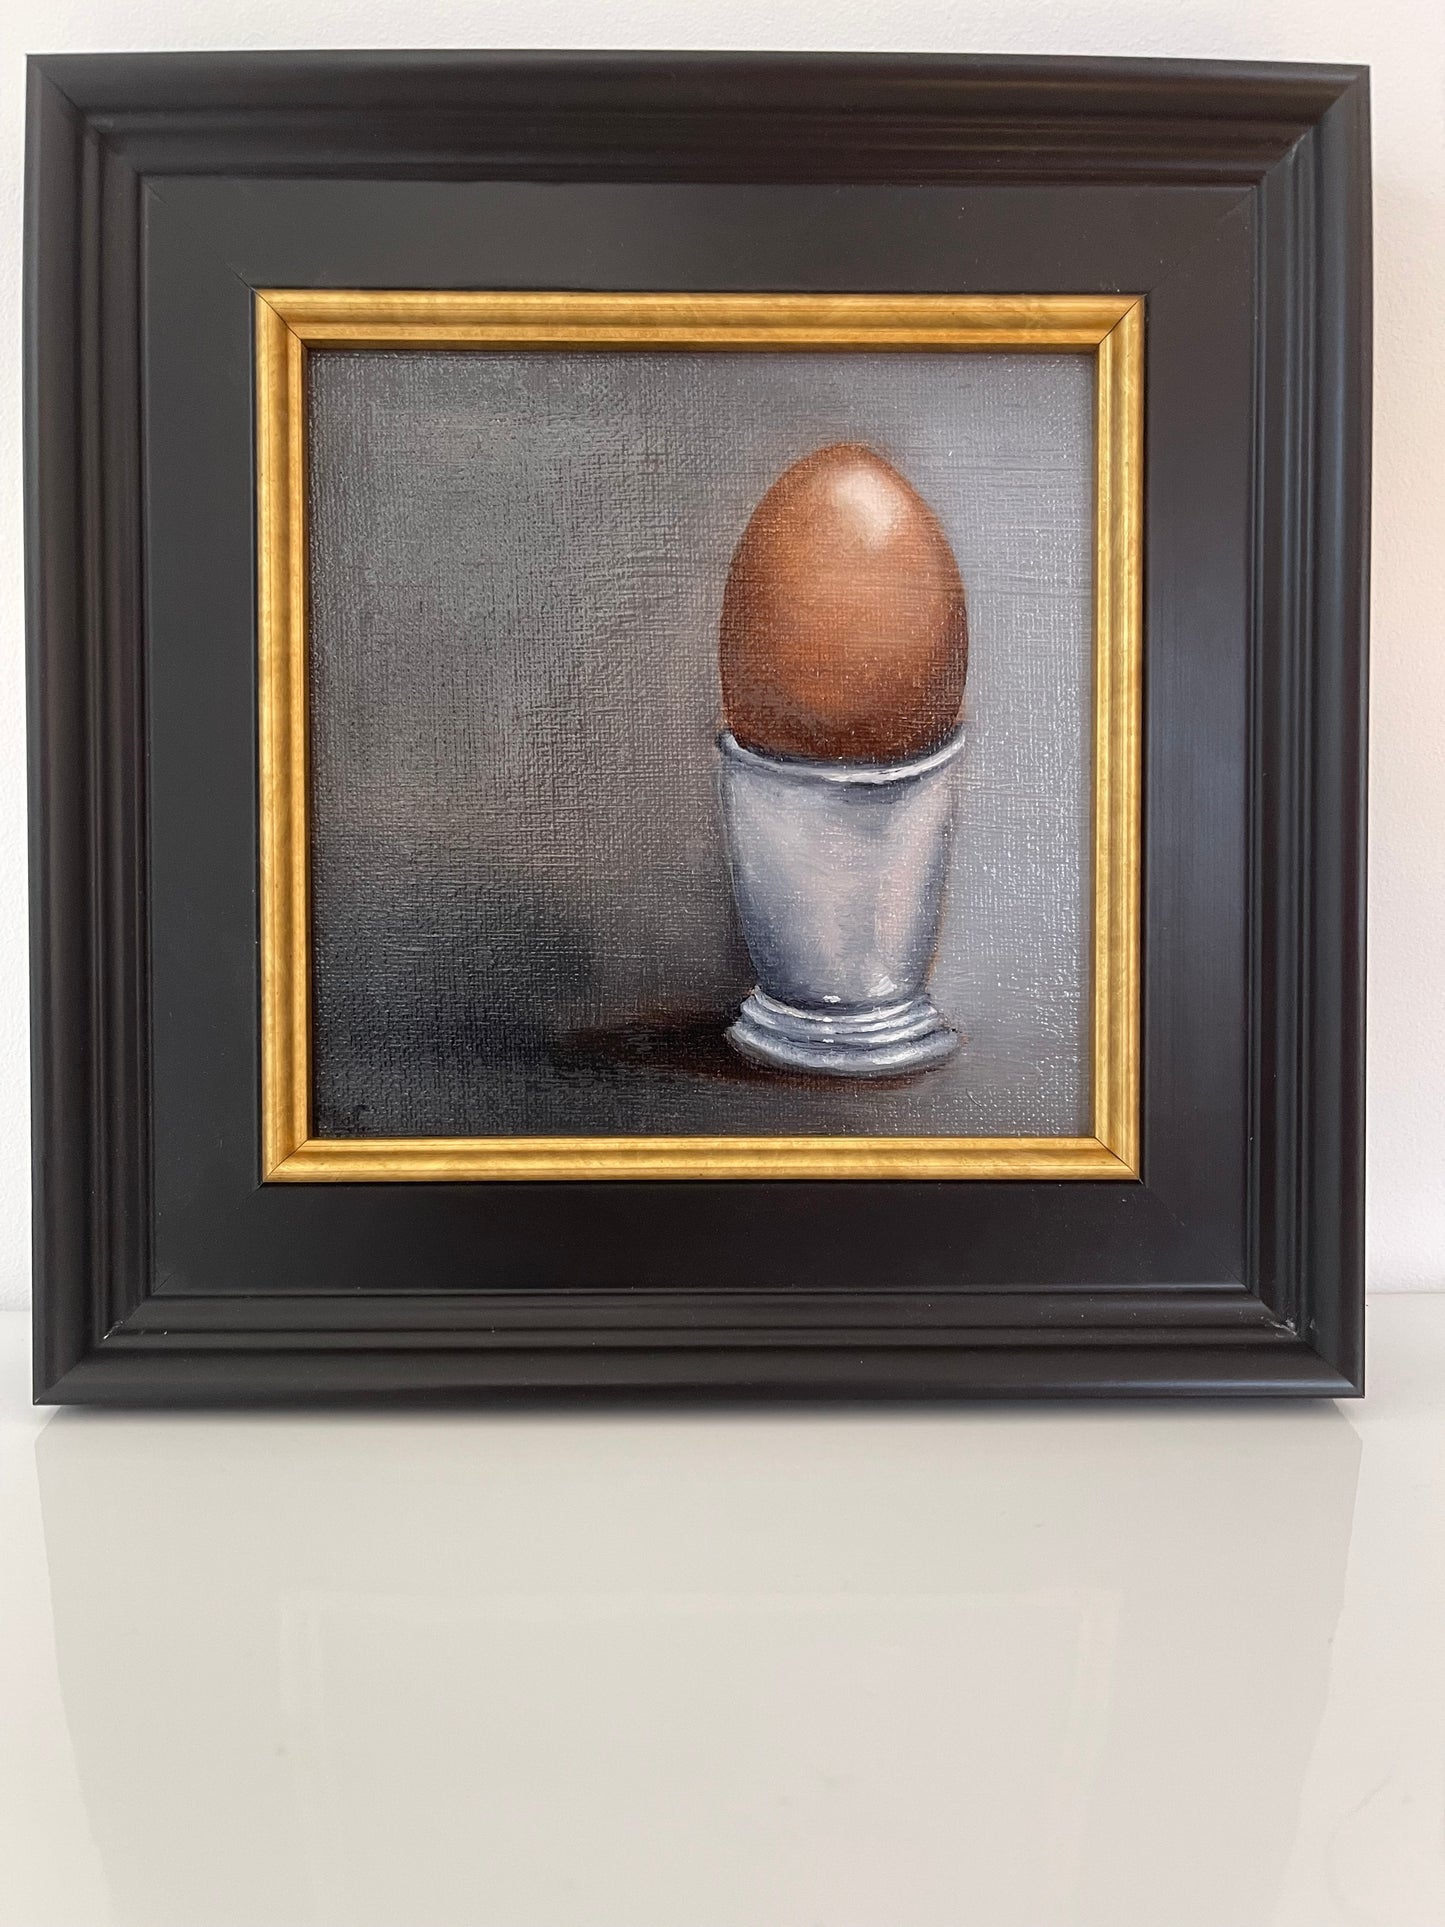 Boiled egg in a silver cup Still Life | Original Oil Painting | 6 x 6 inches with optional frame